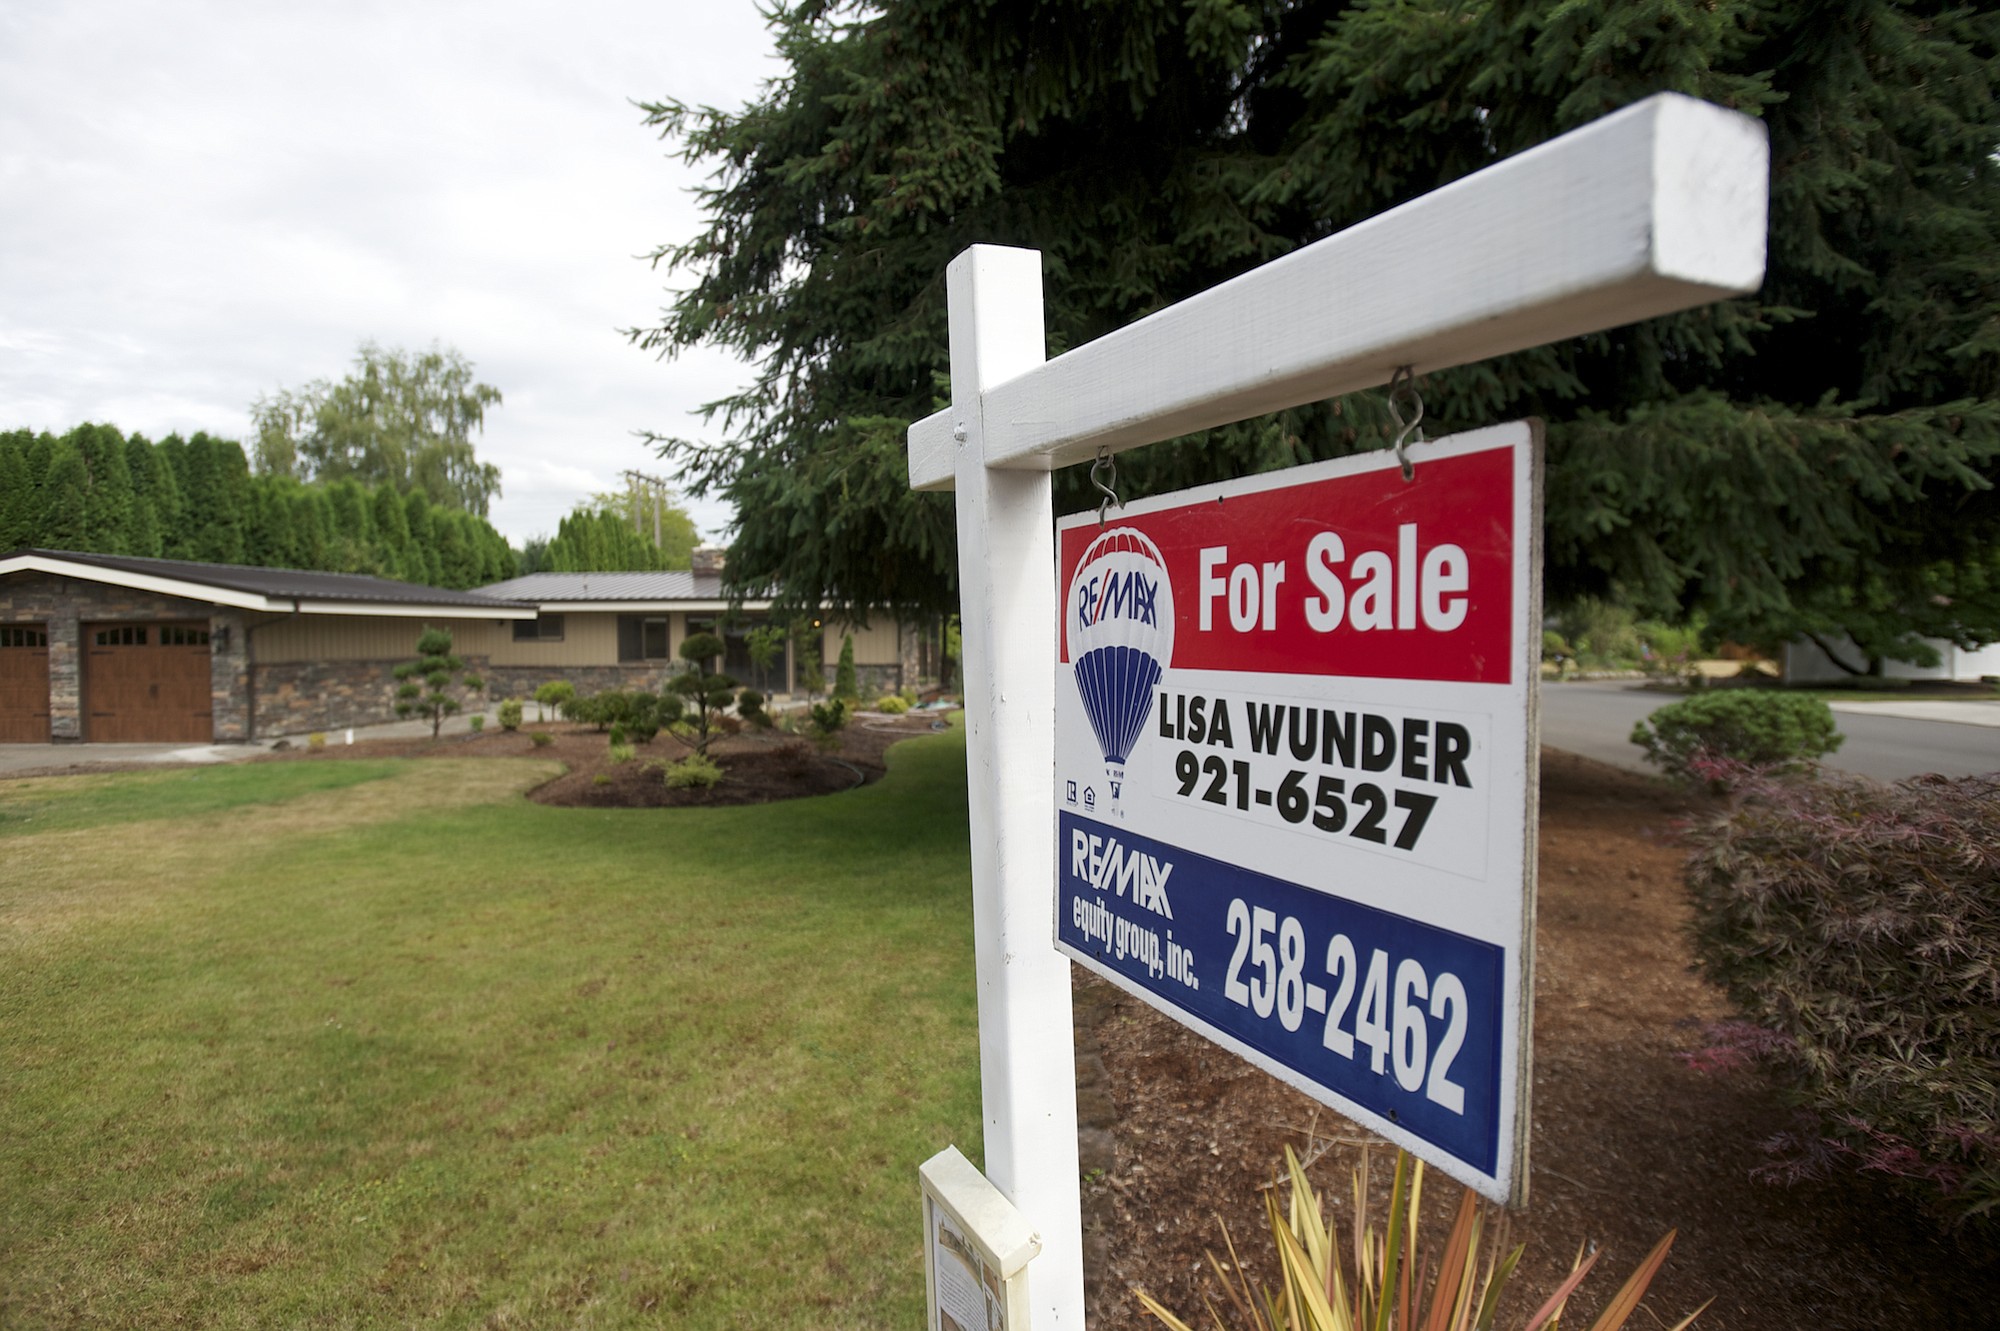 Demand for homes in Clark County remained solid into the winter months, and the arrival of more millennials into the market could increase pressure on an already-low housing inventory.